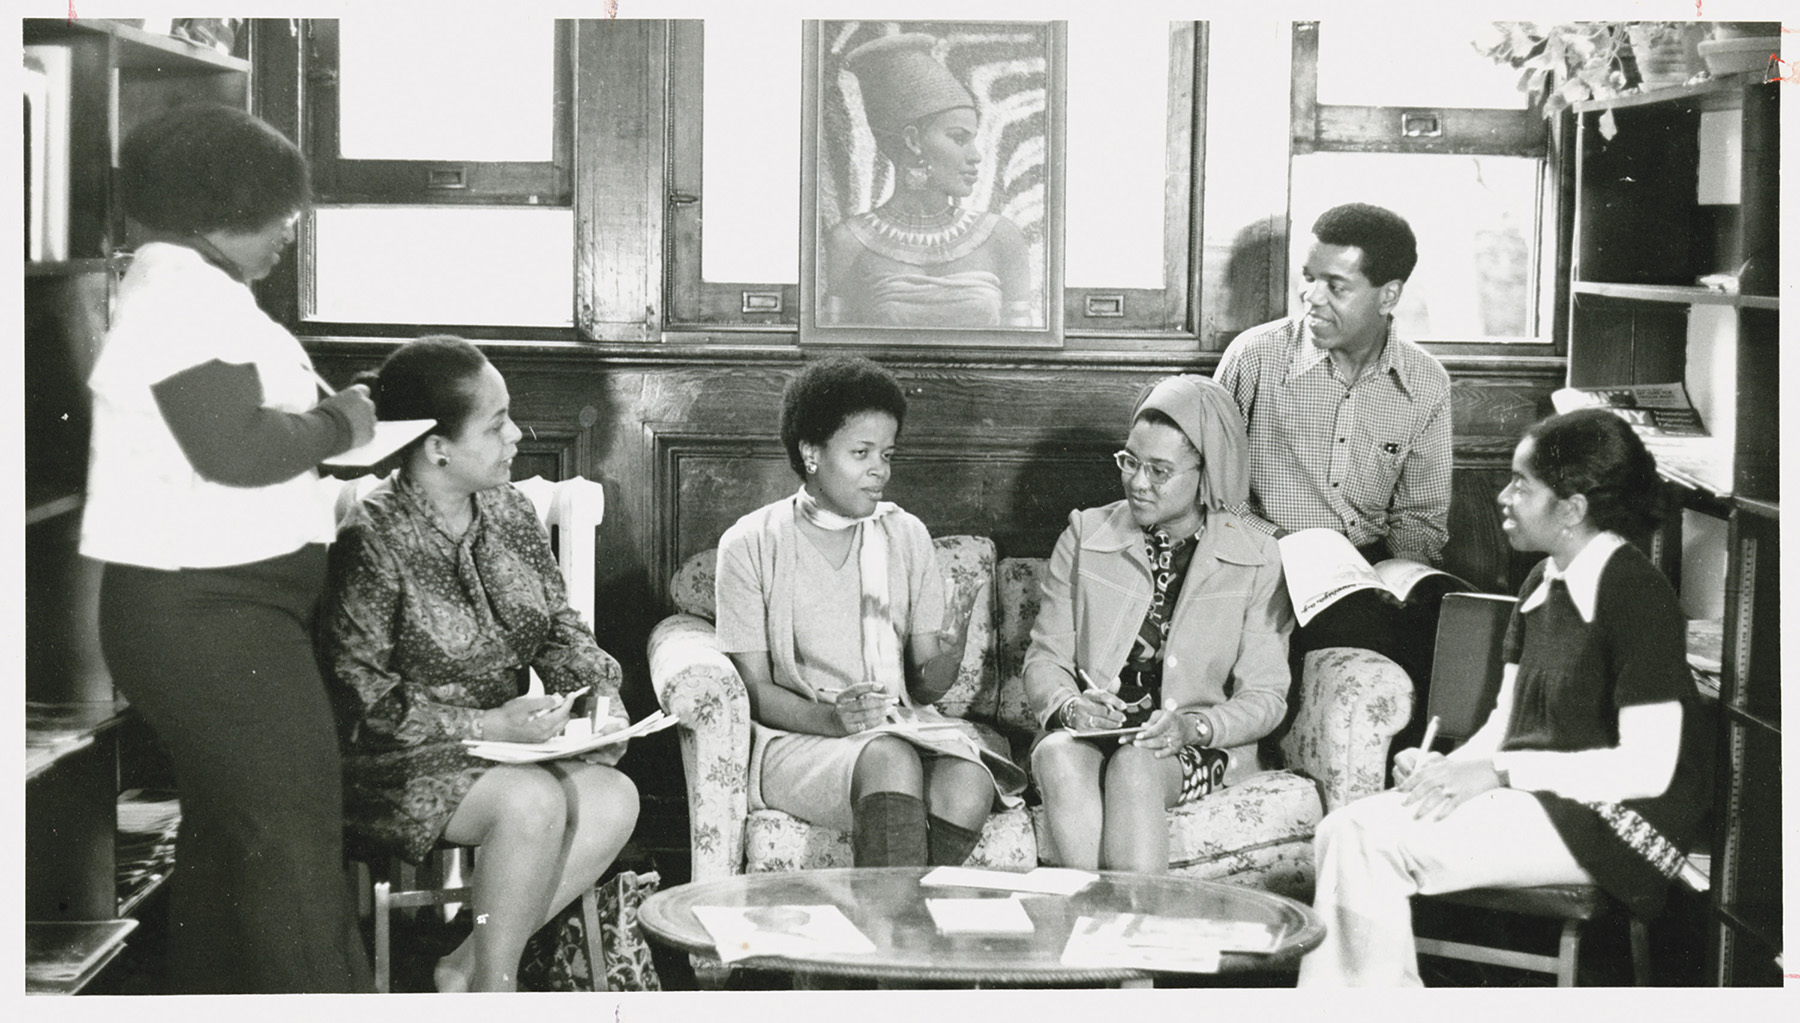 An old black-and-white photo of five people sitting on an old ornate couch in front of a coffee table while a person stands looking at them with a notepad preparing to write.